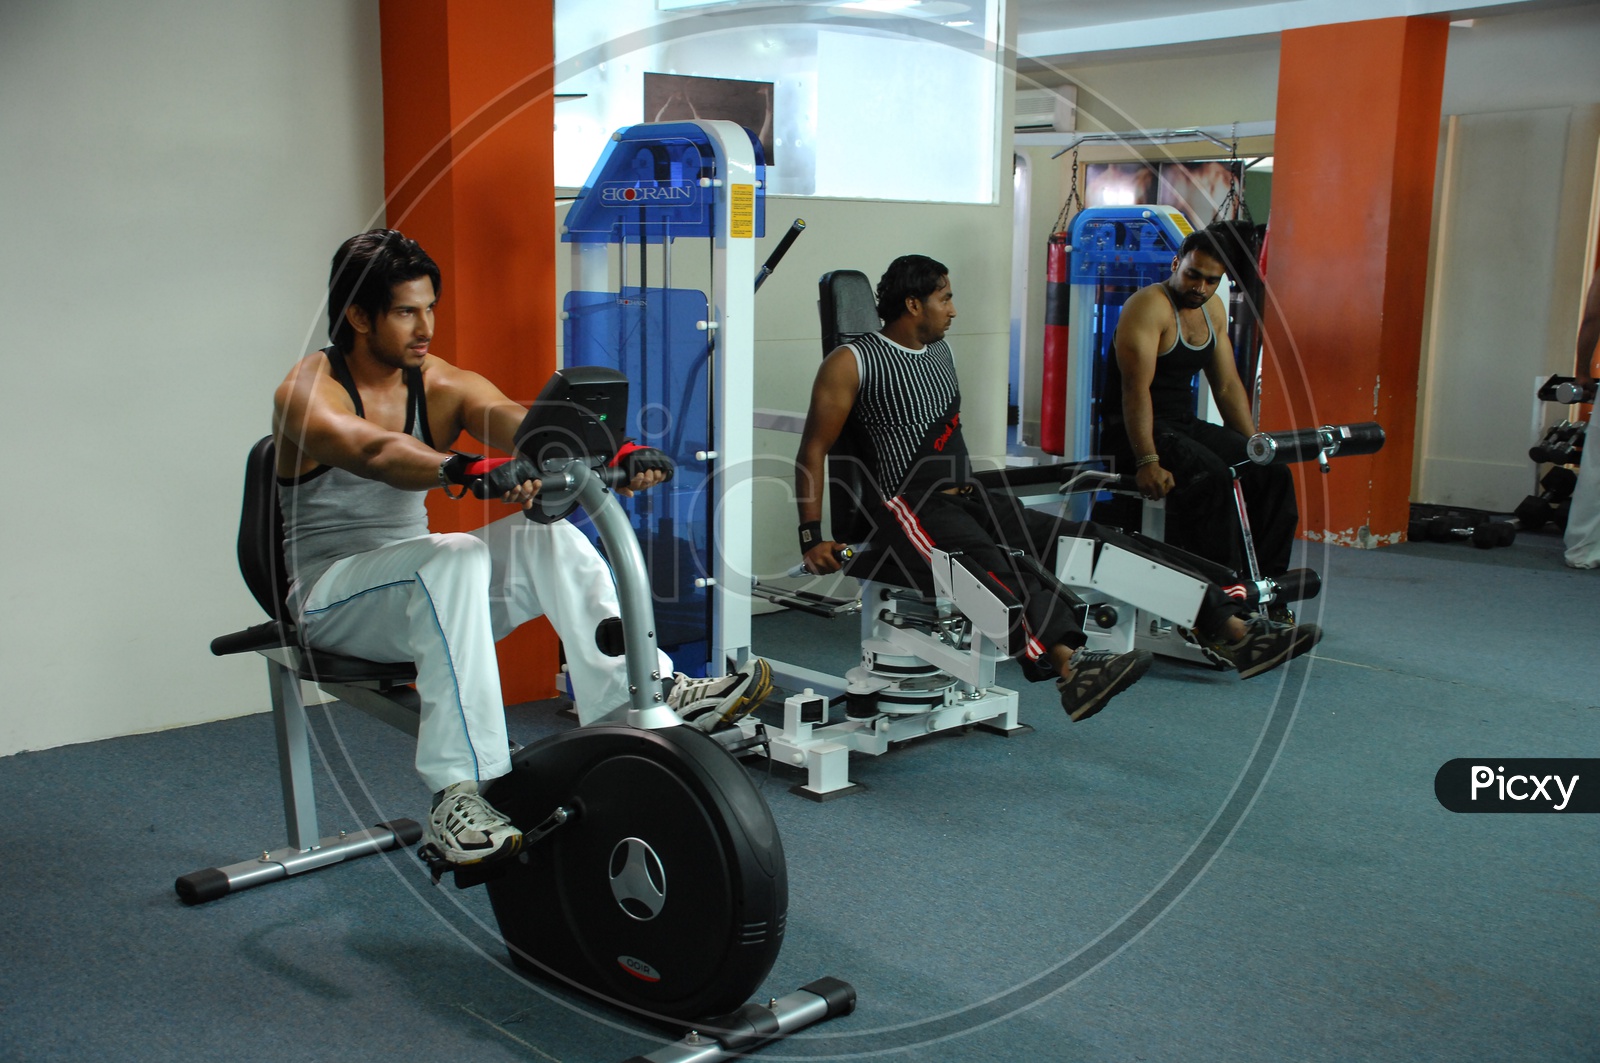 Actor Vamsi Krishna doing the upright bike exercise alongside the two other men in a Gym